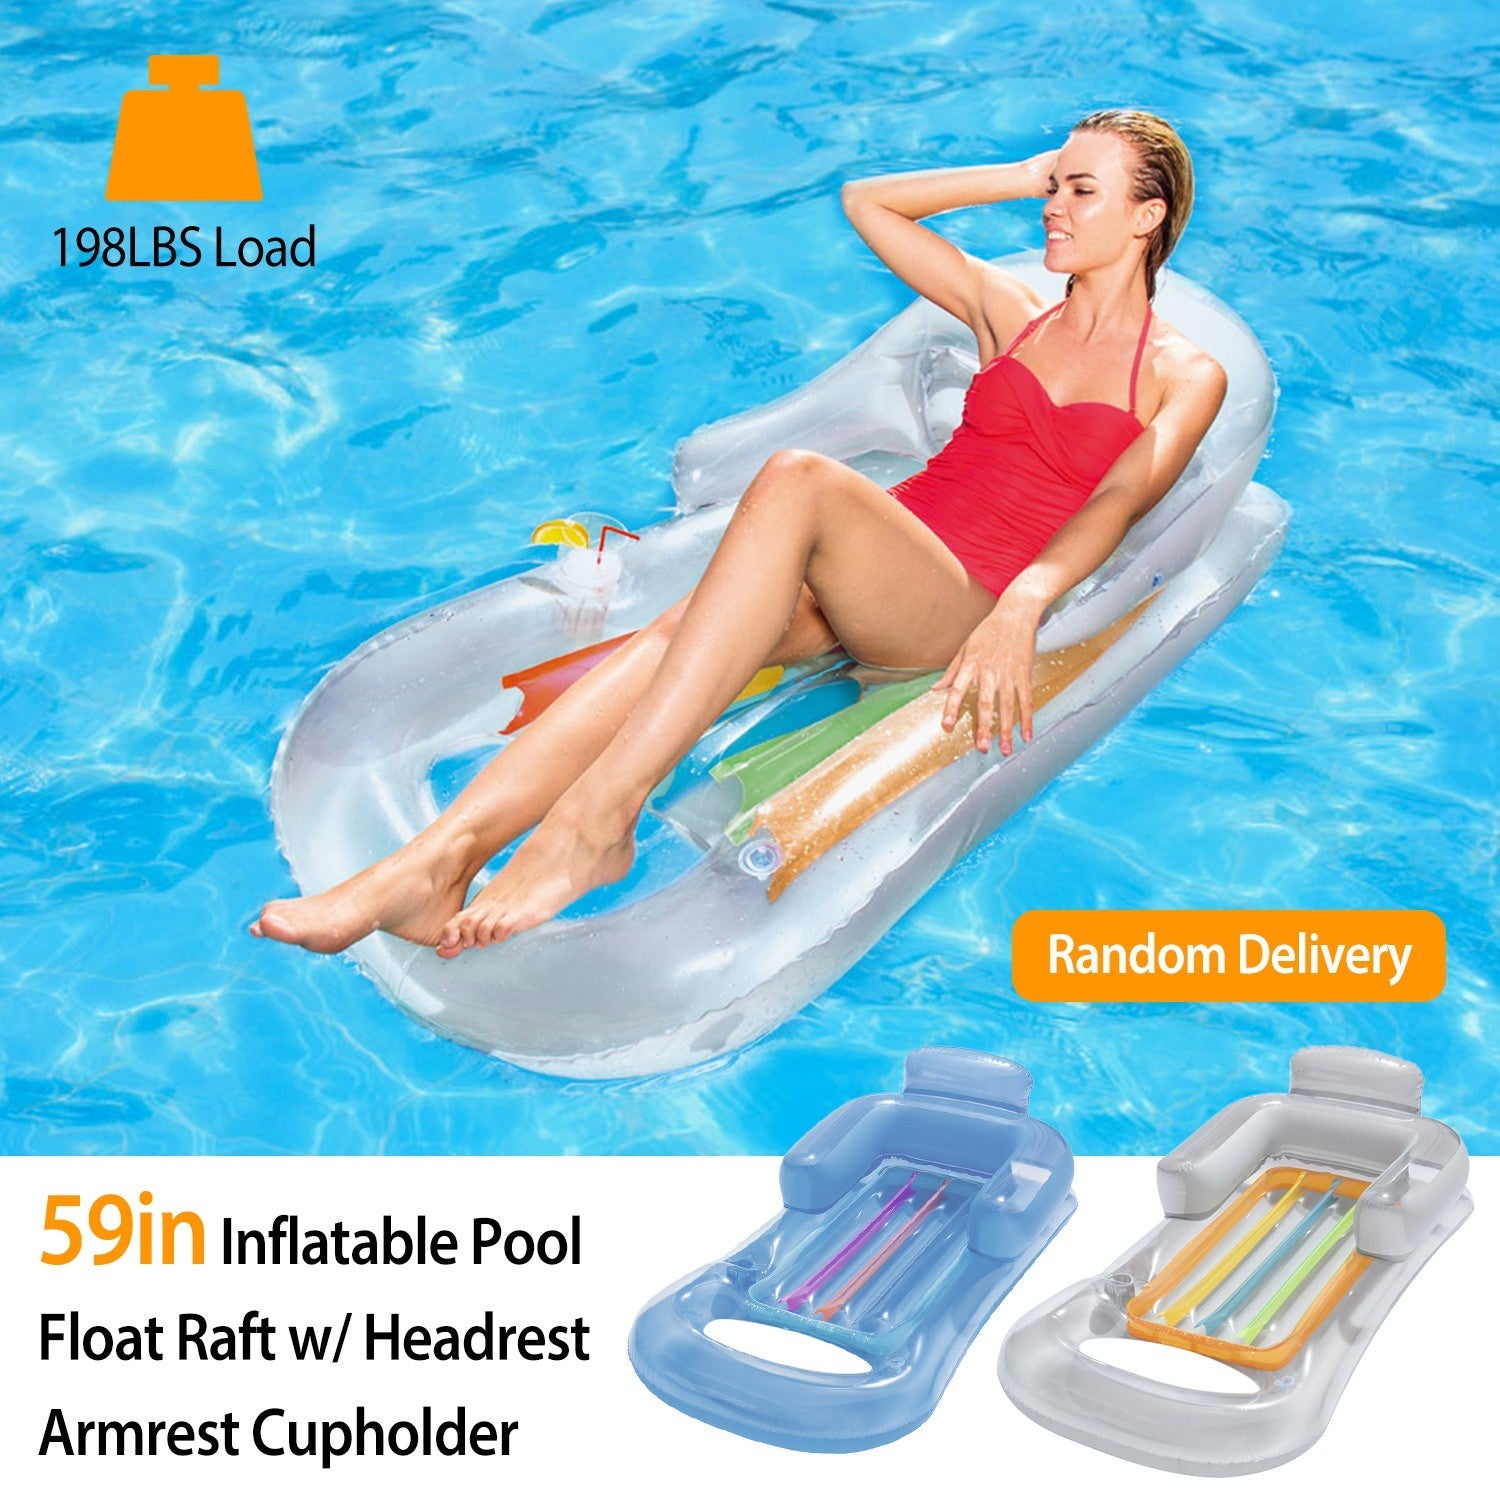 59in Inflatable Pool Float Raft w/ Headrest Armrest Cupholder Swimming Pool Lounge Air Mat Chair - SportsGO